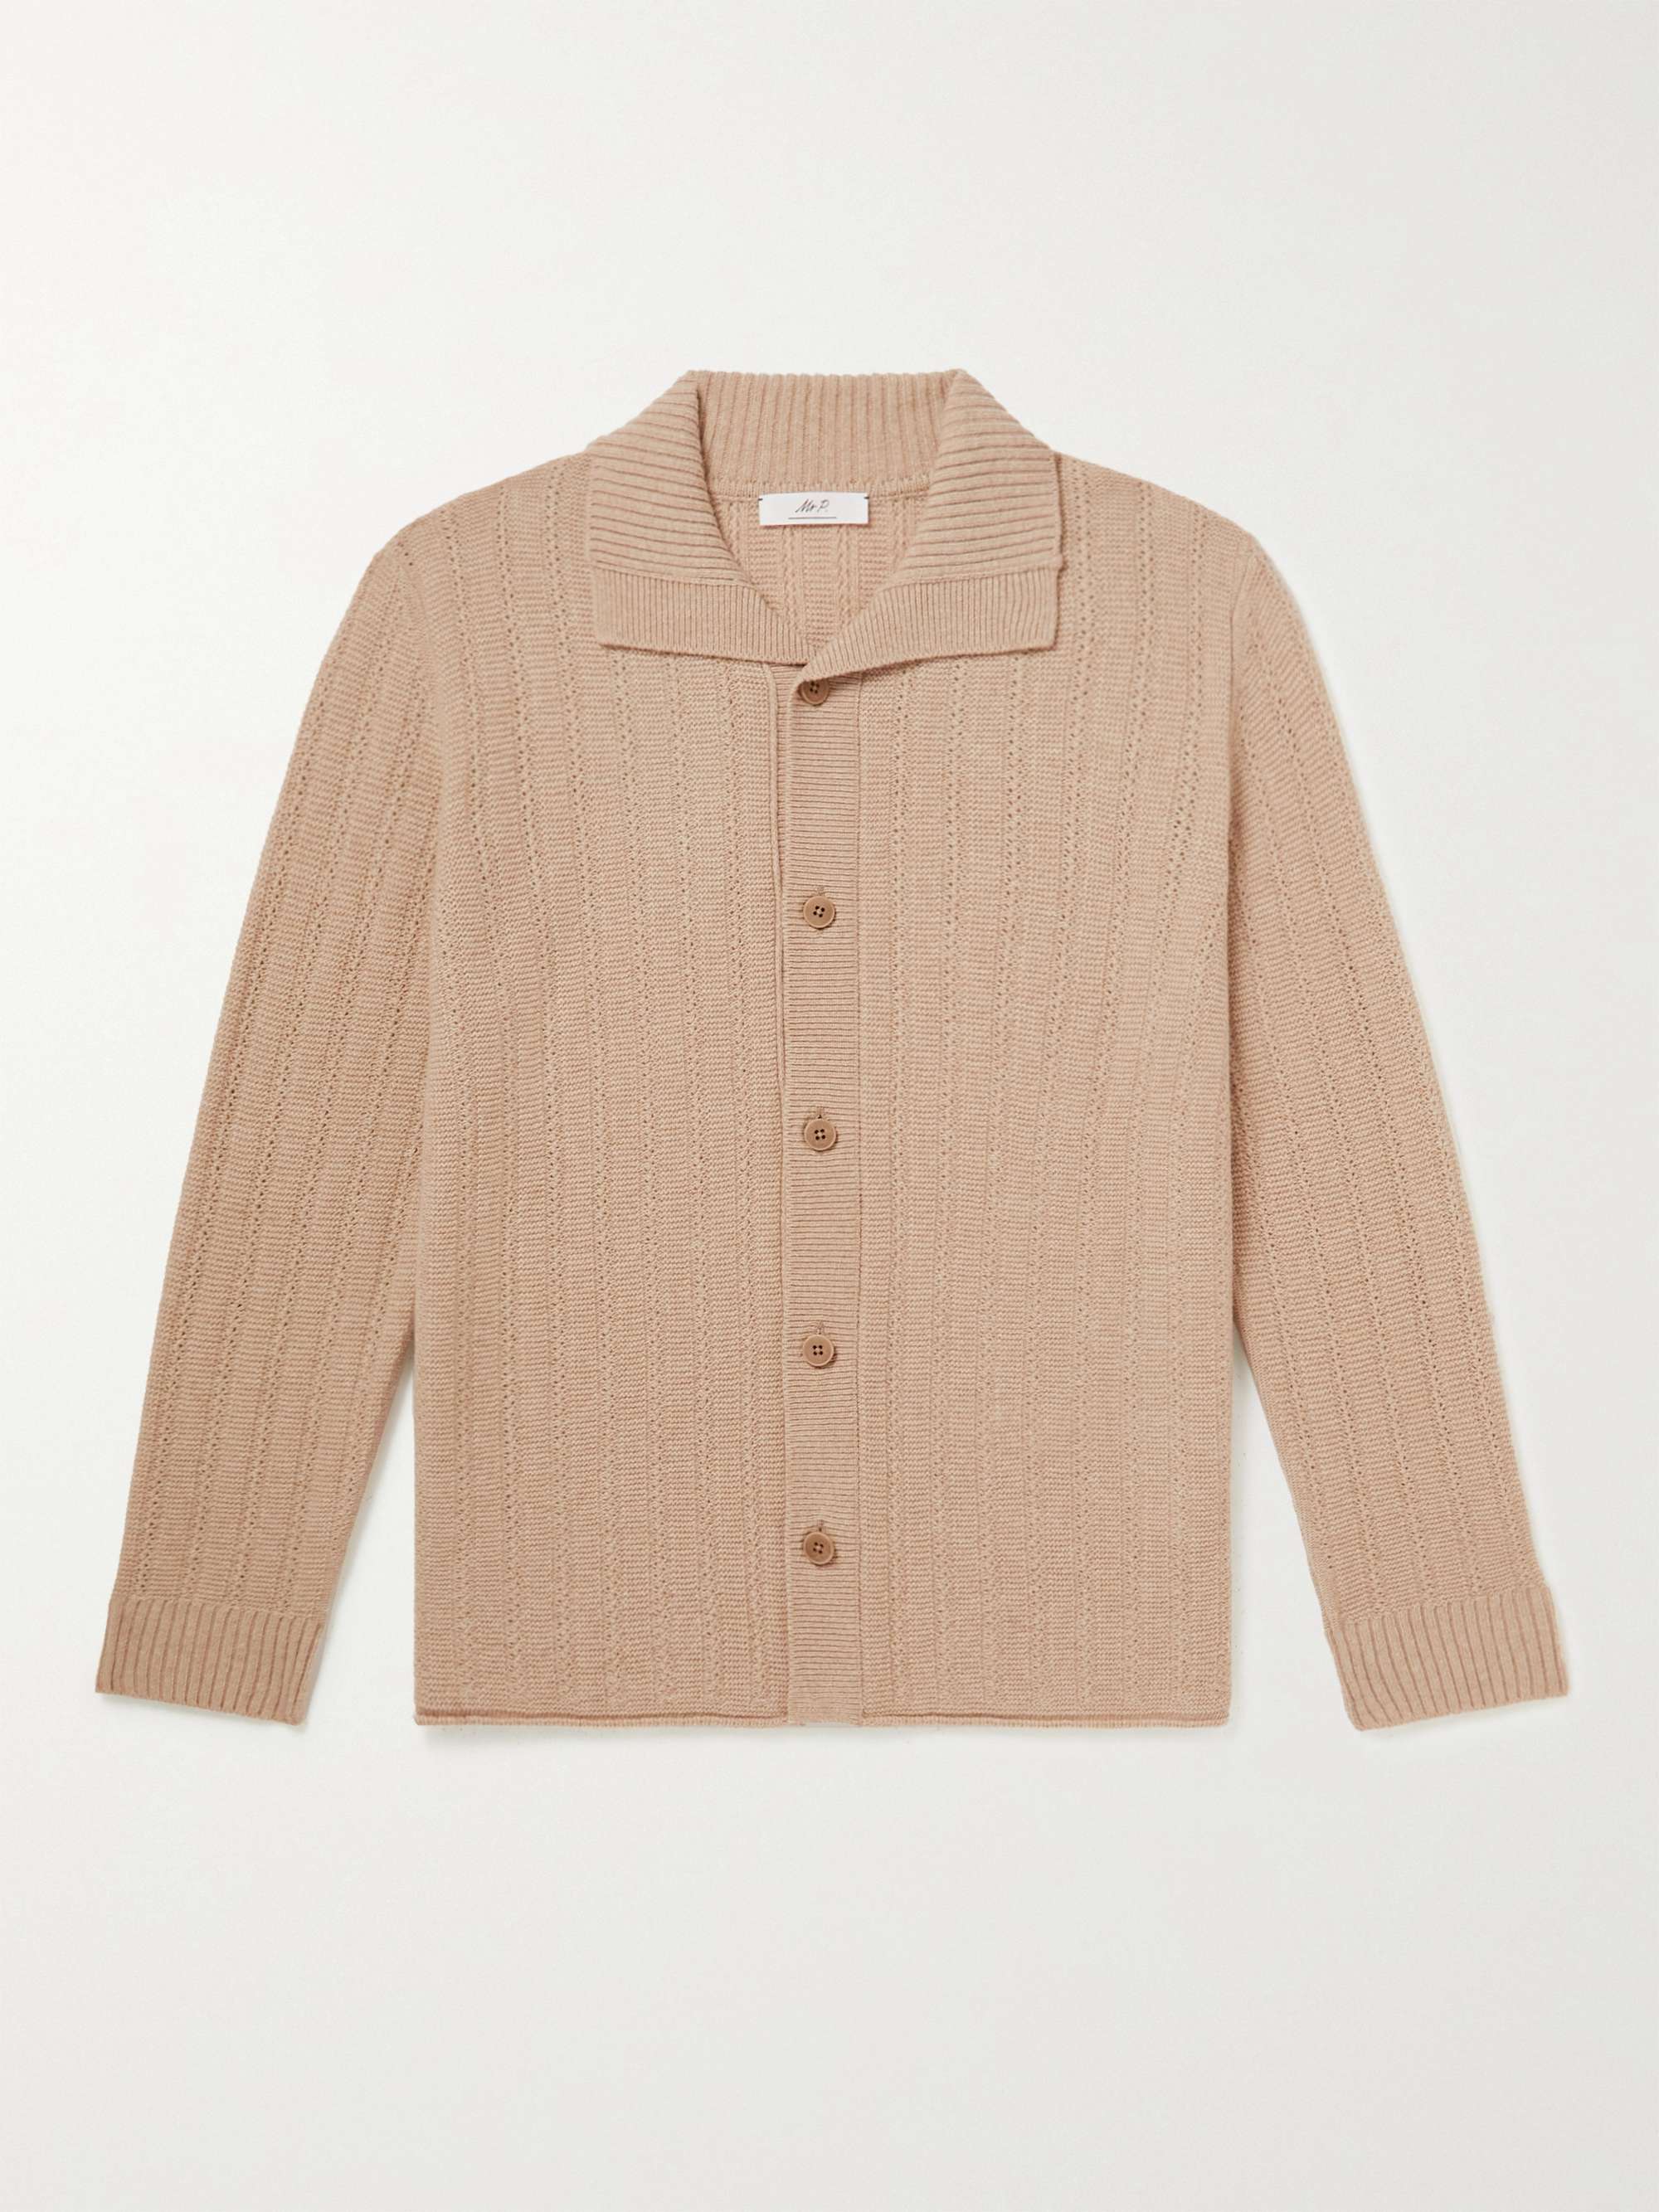 MR P. Wolly Open-Knit Wool Cardigan for Men